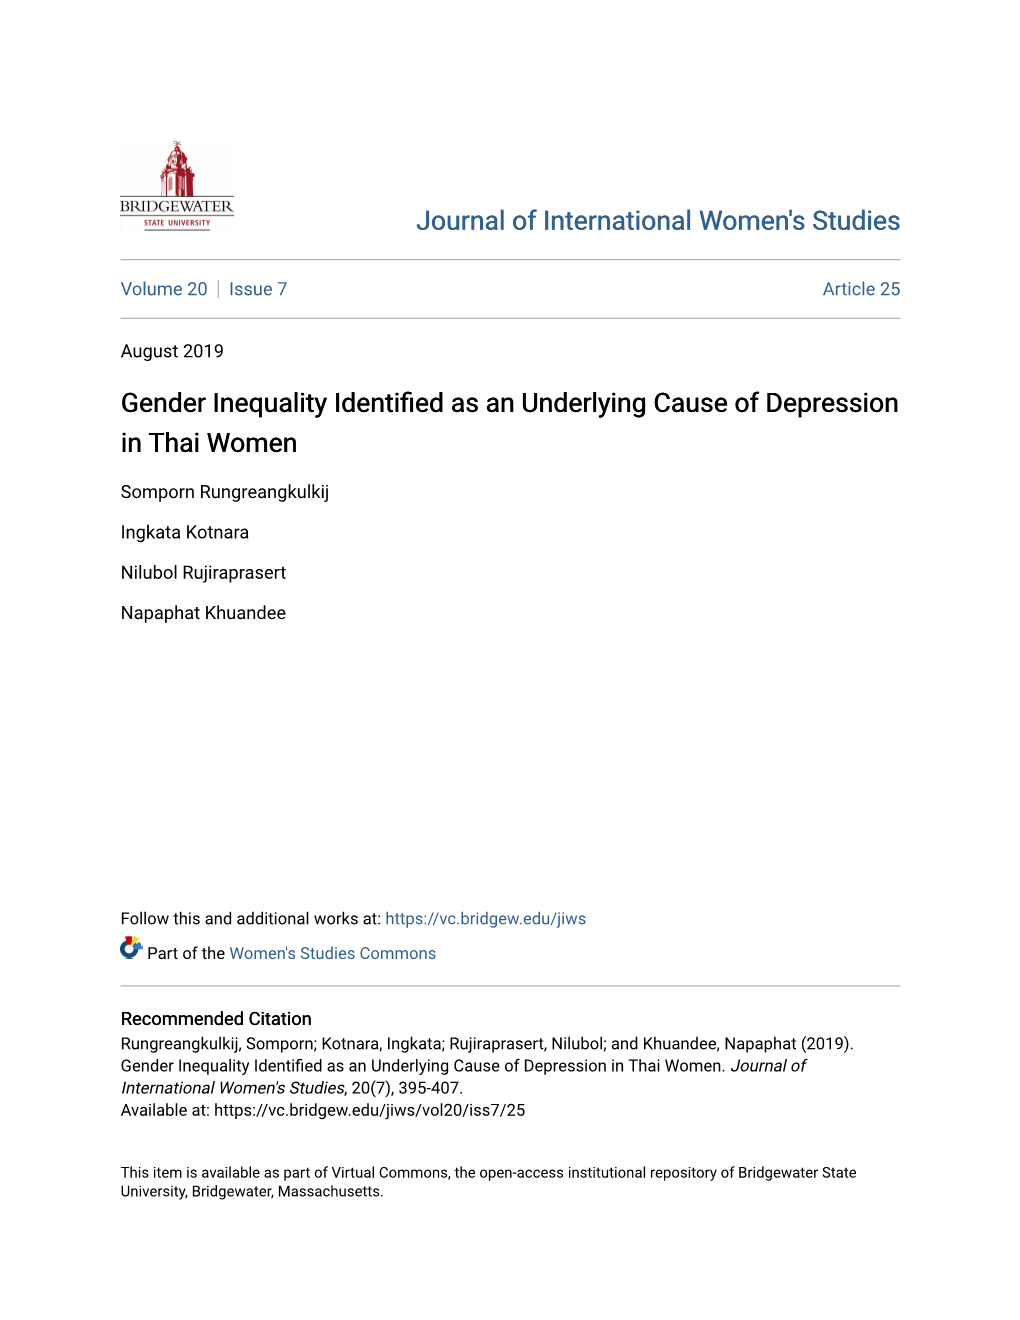 Gender Inequality Identified As an Underlying Cause of Depression in Thai Women